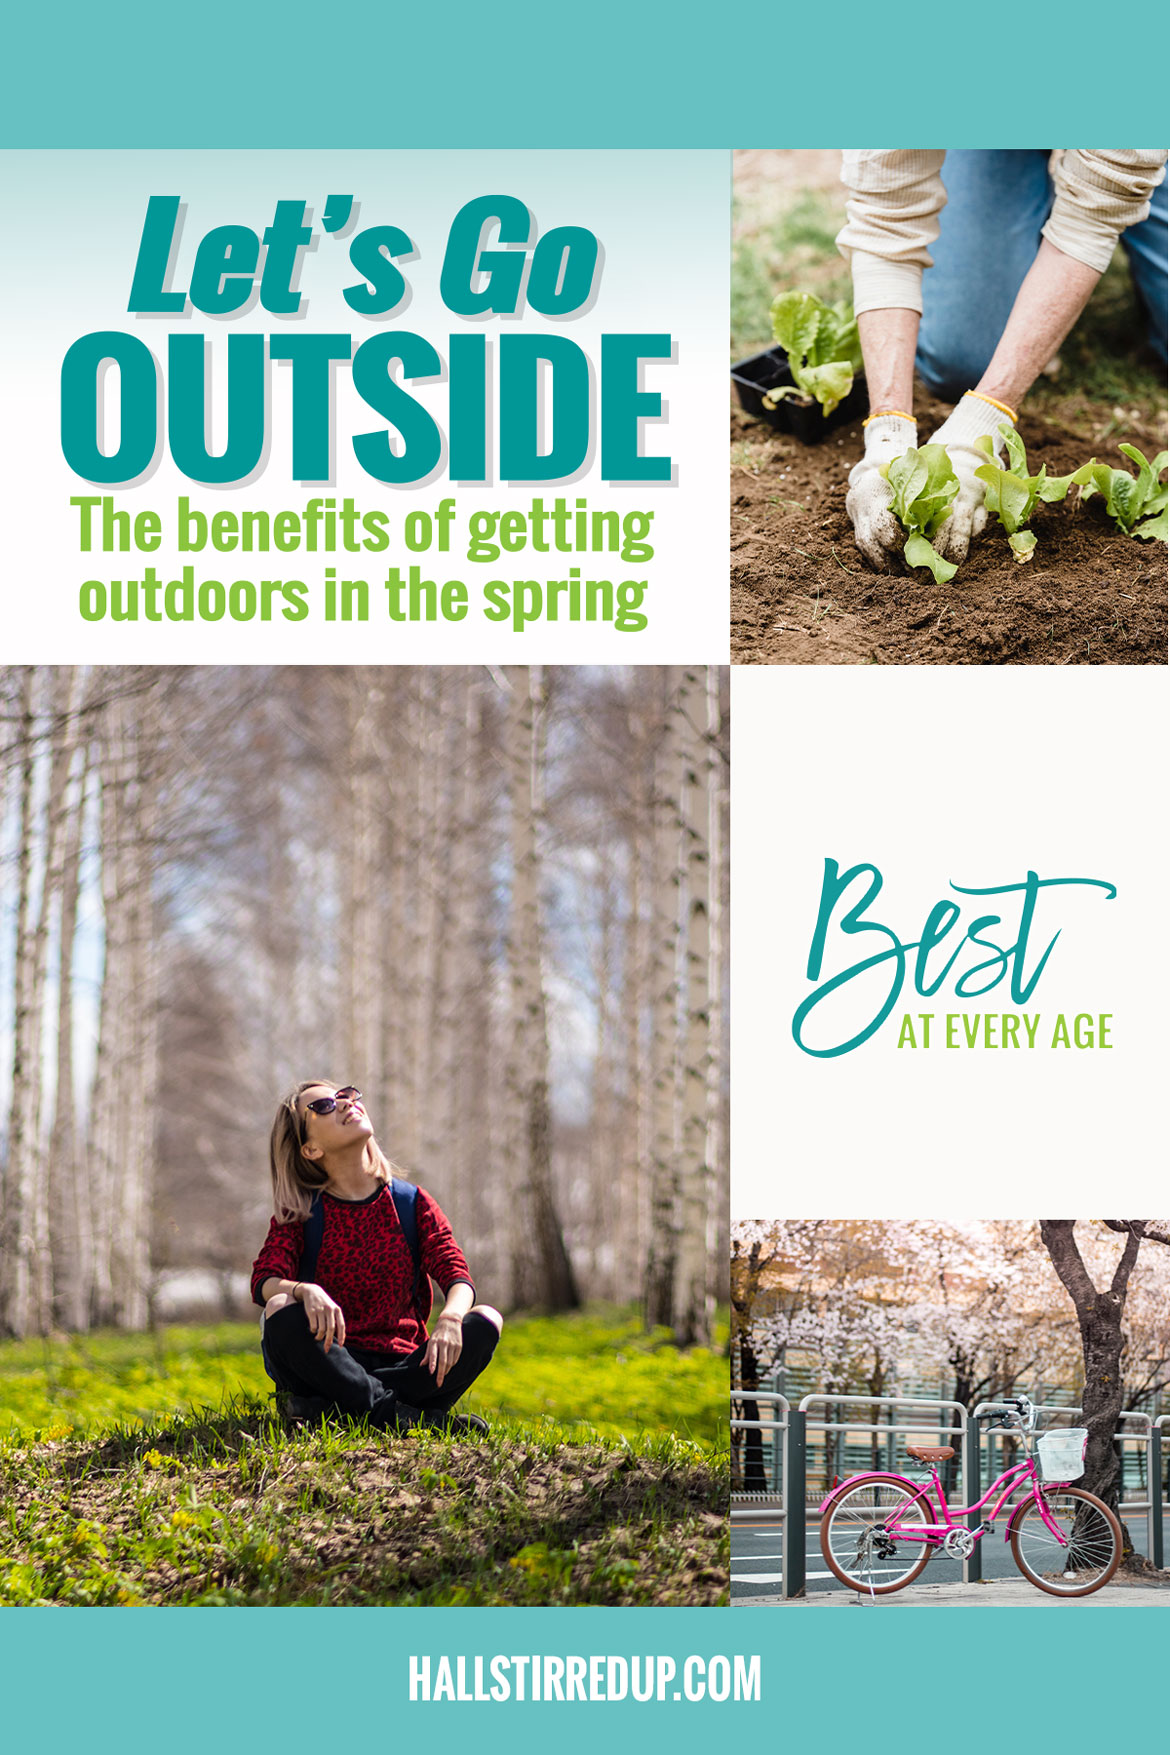 Let's go outside The benefits of being outdoors in the spring